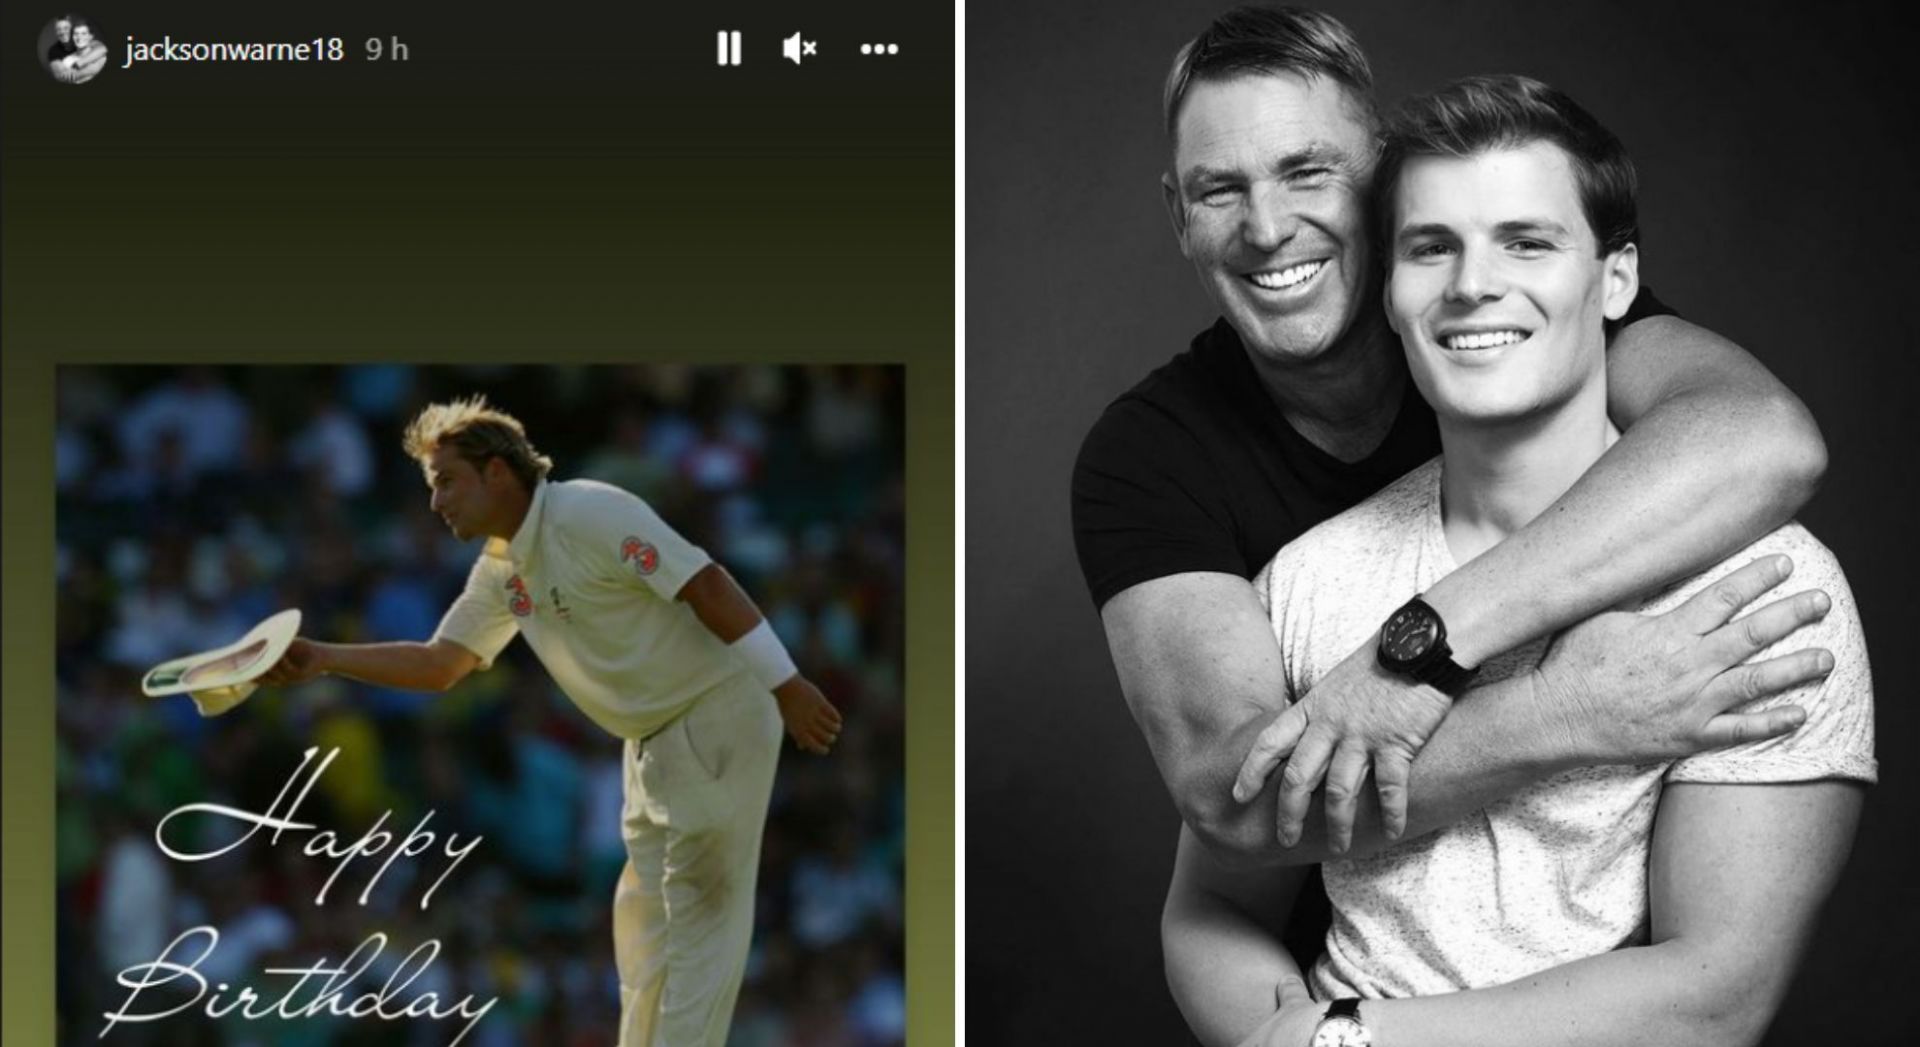 Shane Warne is one of the biggest names in world cricket.